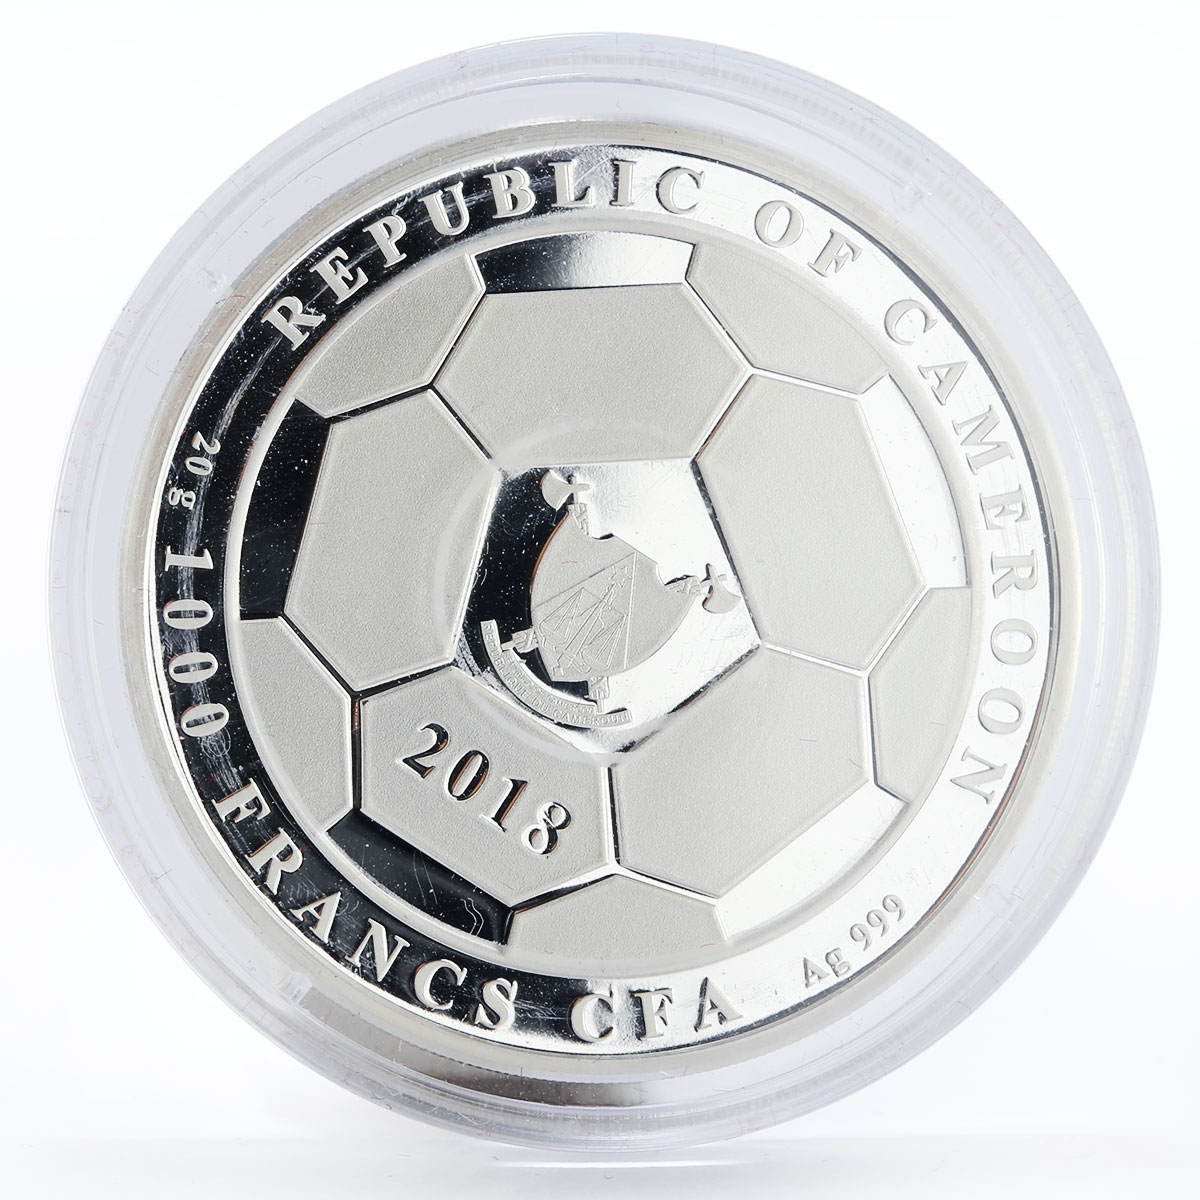 Cameroon 1000 francs Train of Winnings football colored silver coin 2018